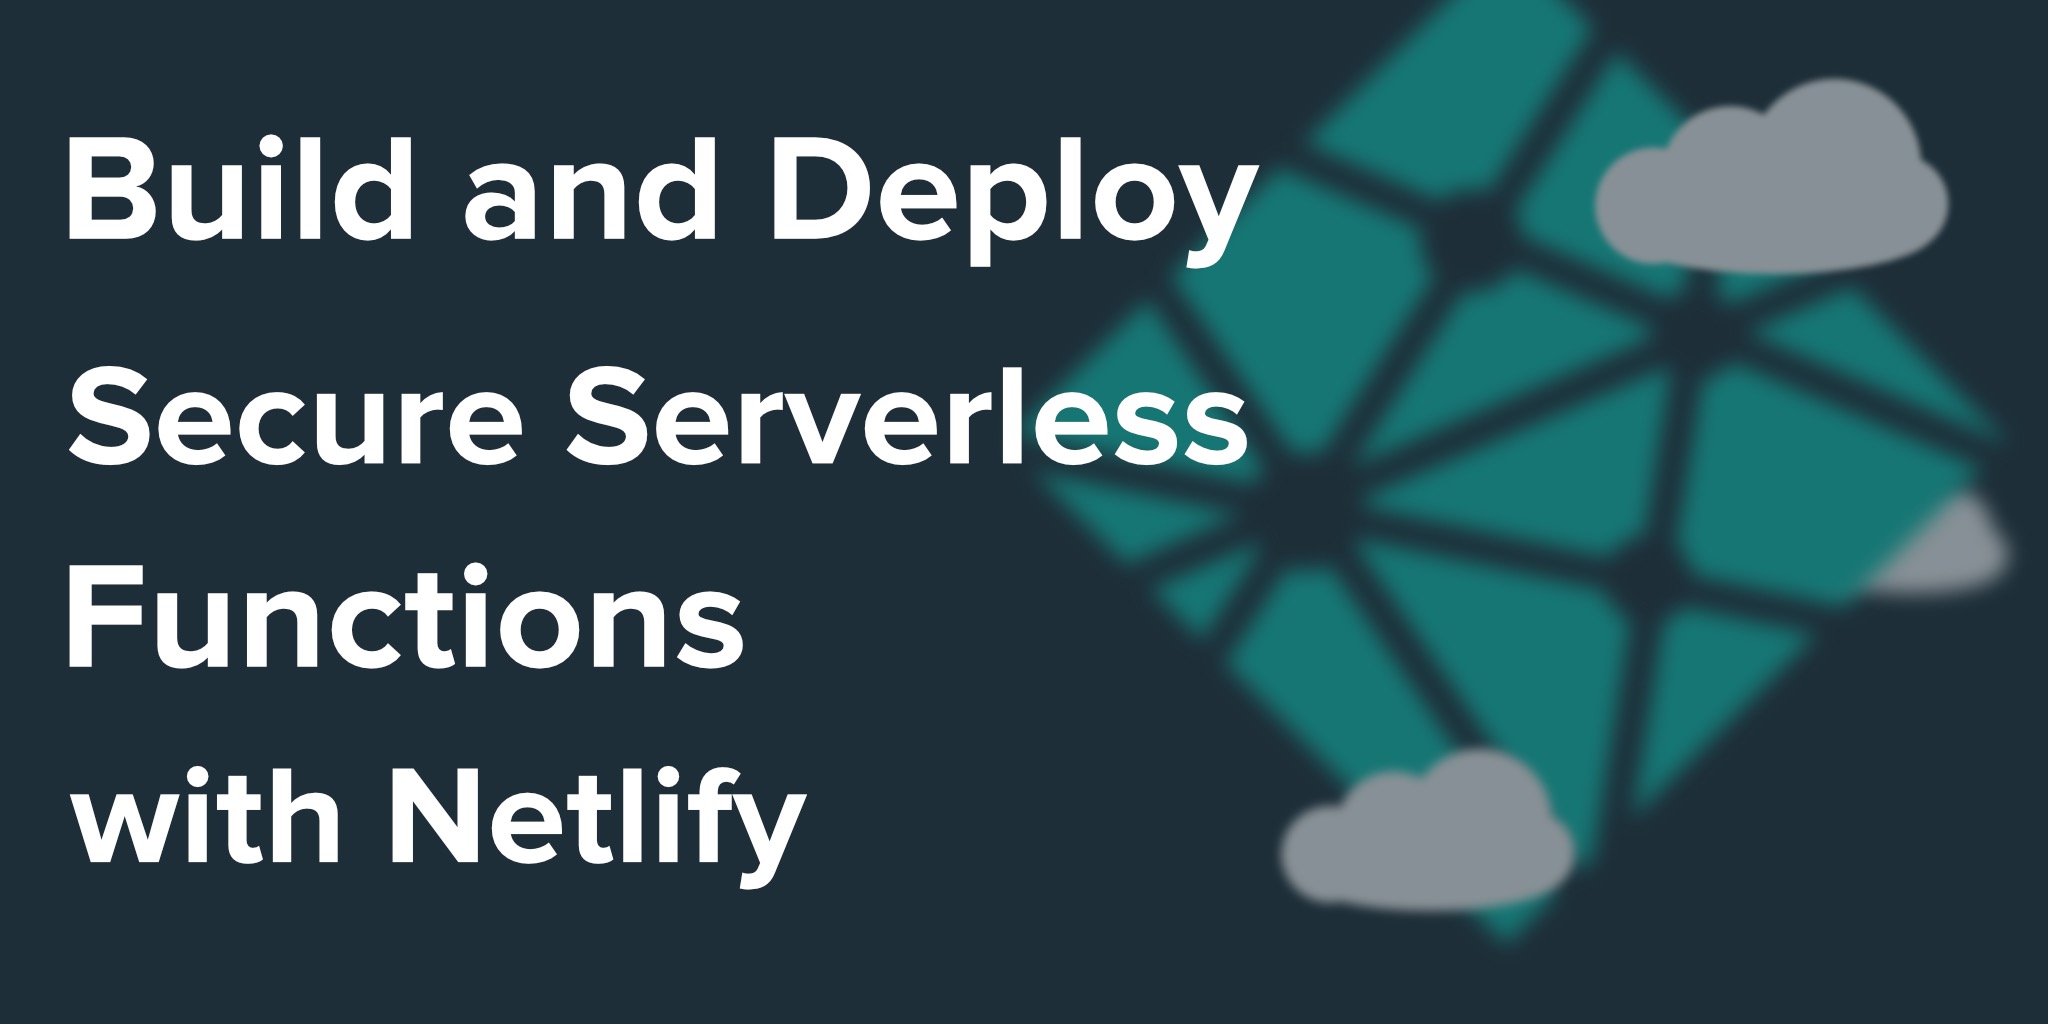 Build and Deploy Secure Serverless Functions with Netlify